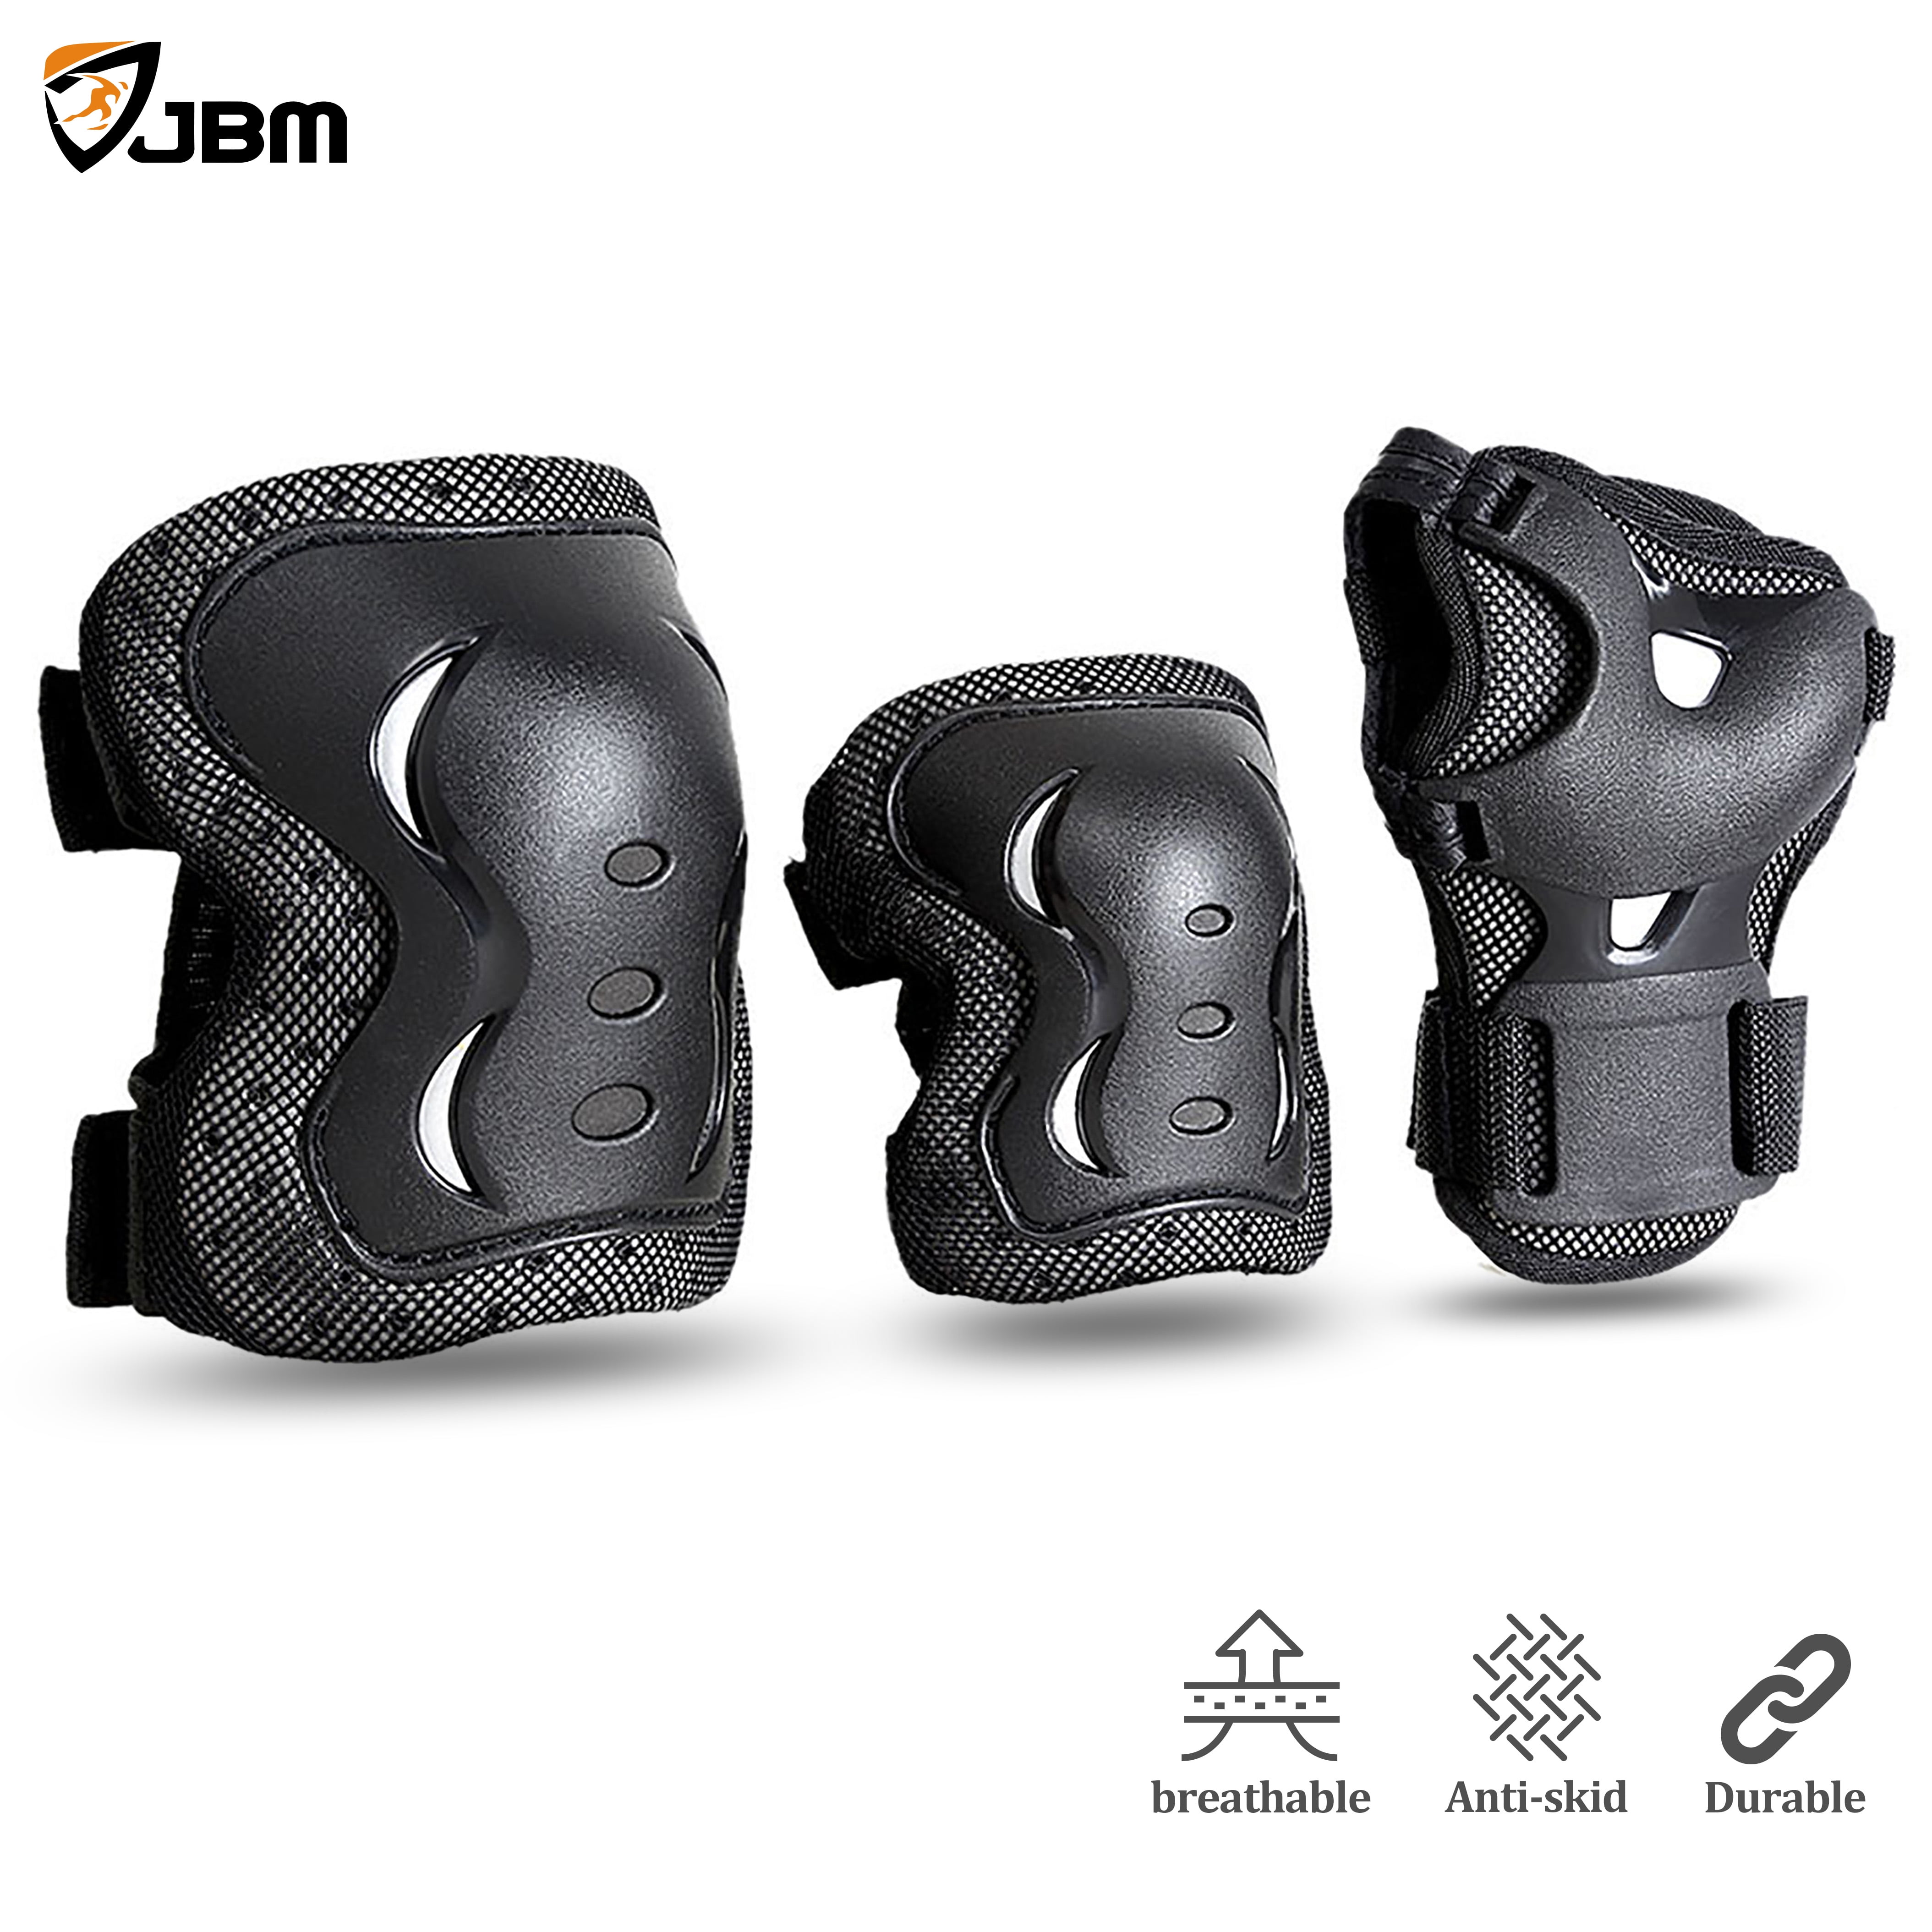 Roller Skating and ect. Adult/Child Knee Pads Wrist Guards Elbow Pads 7 in 1 Protective Gear Set for Multi-Sports:Biking 